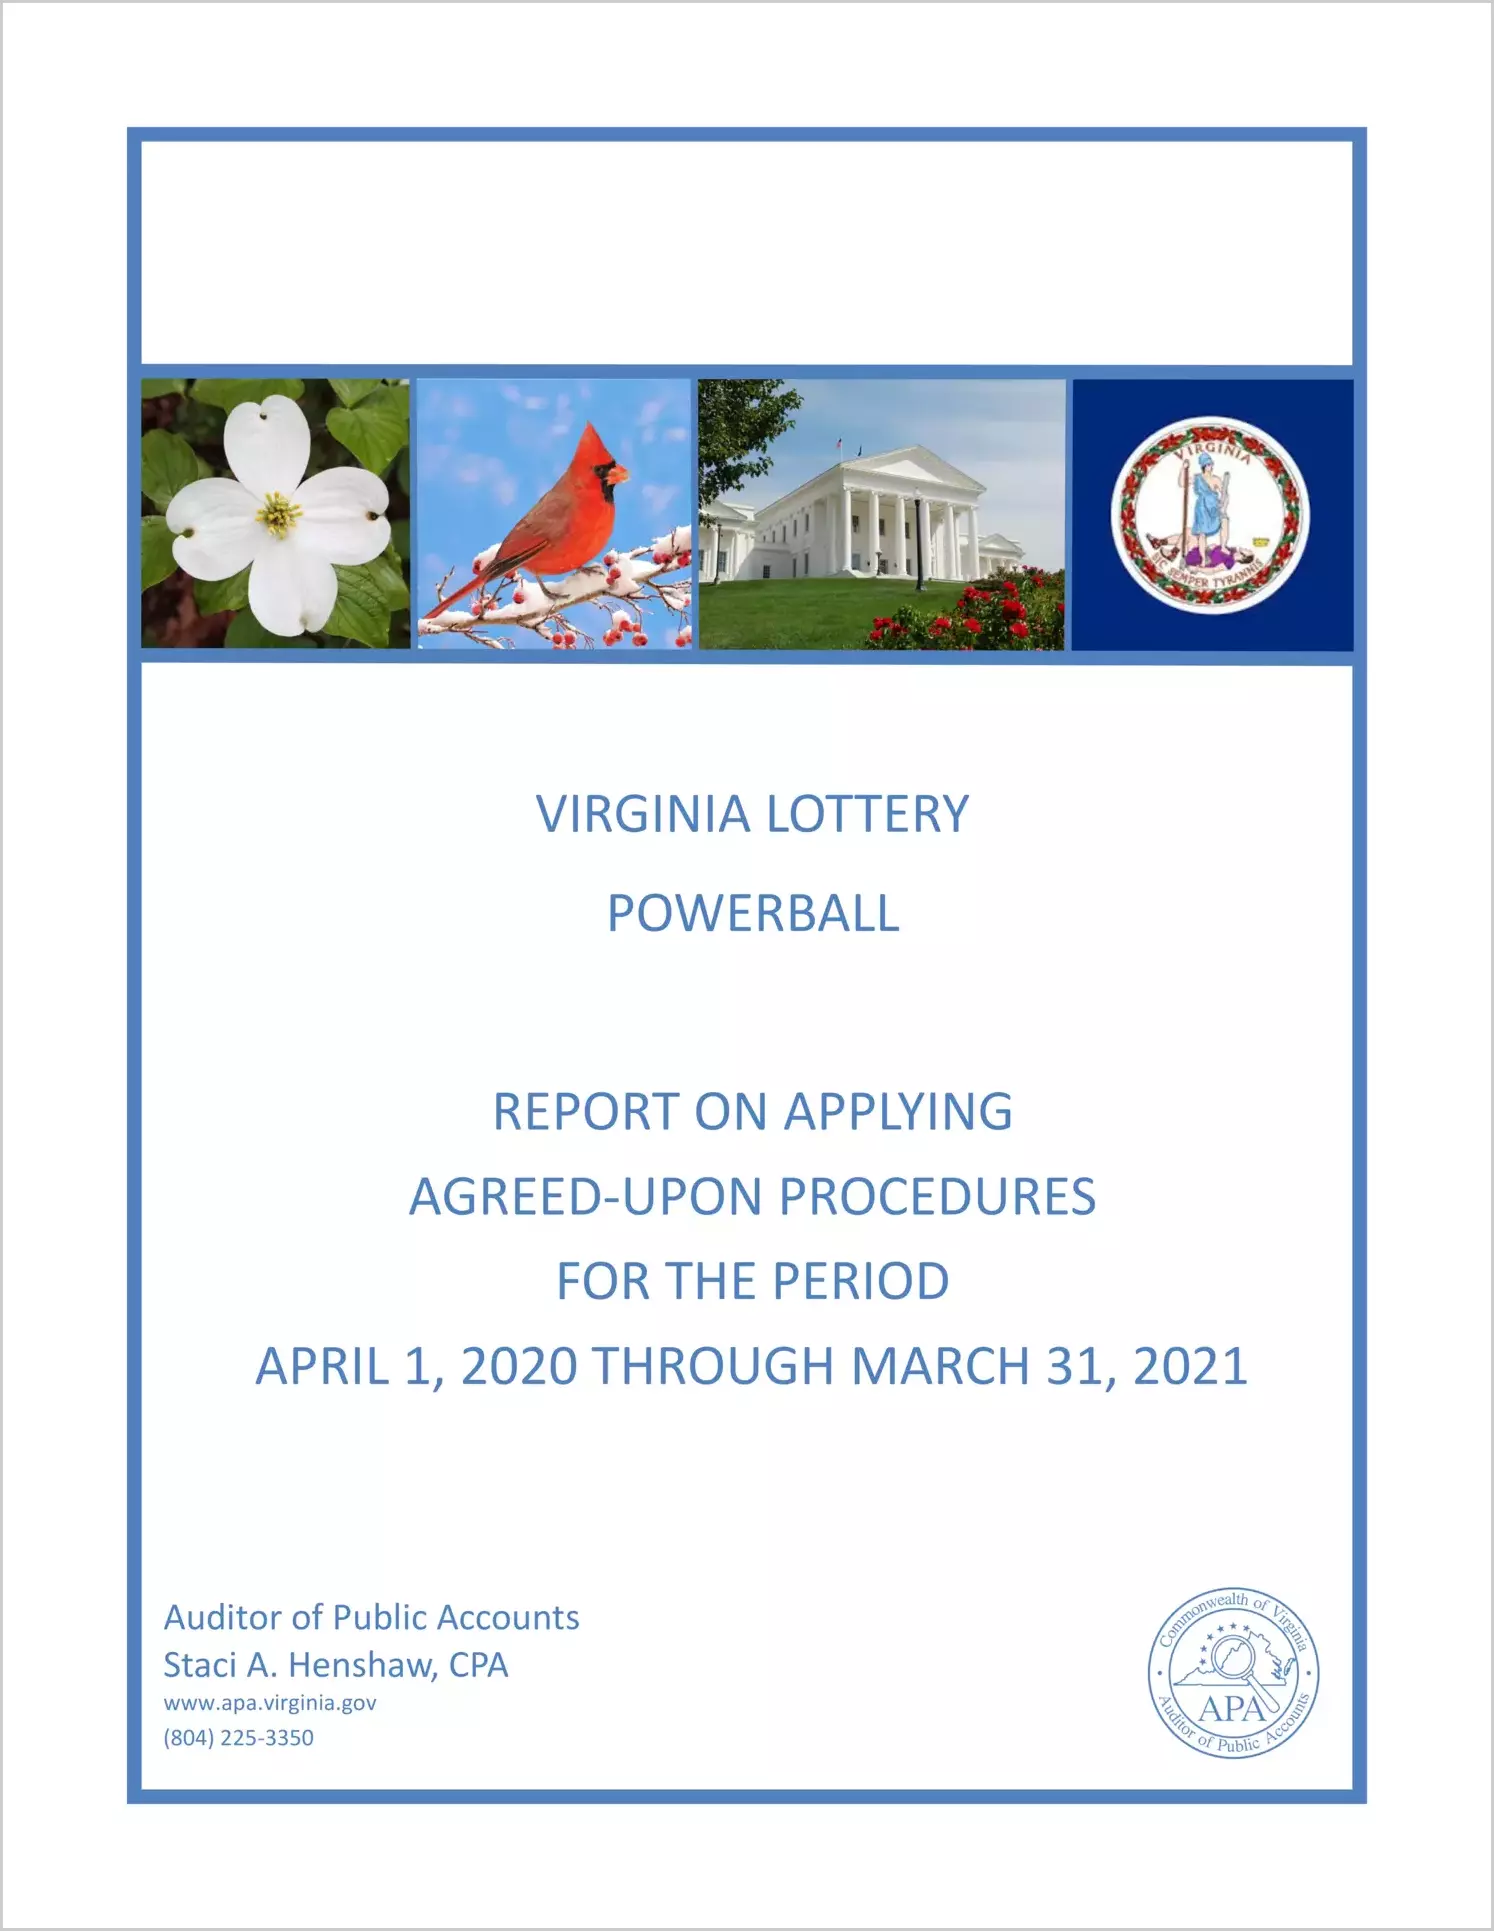 Virginia Lottery Powerball Report on Applying Agreed-Upon Procedures for the period April 1, 2020 through March 31, 2021